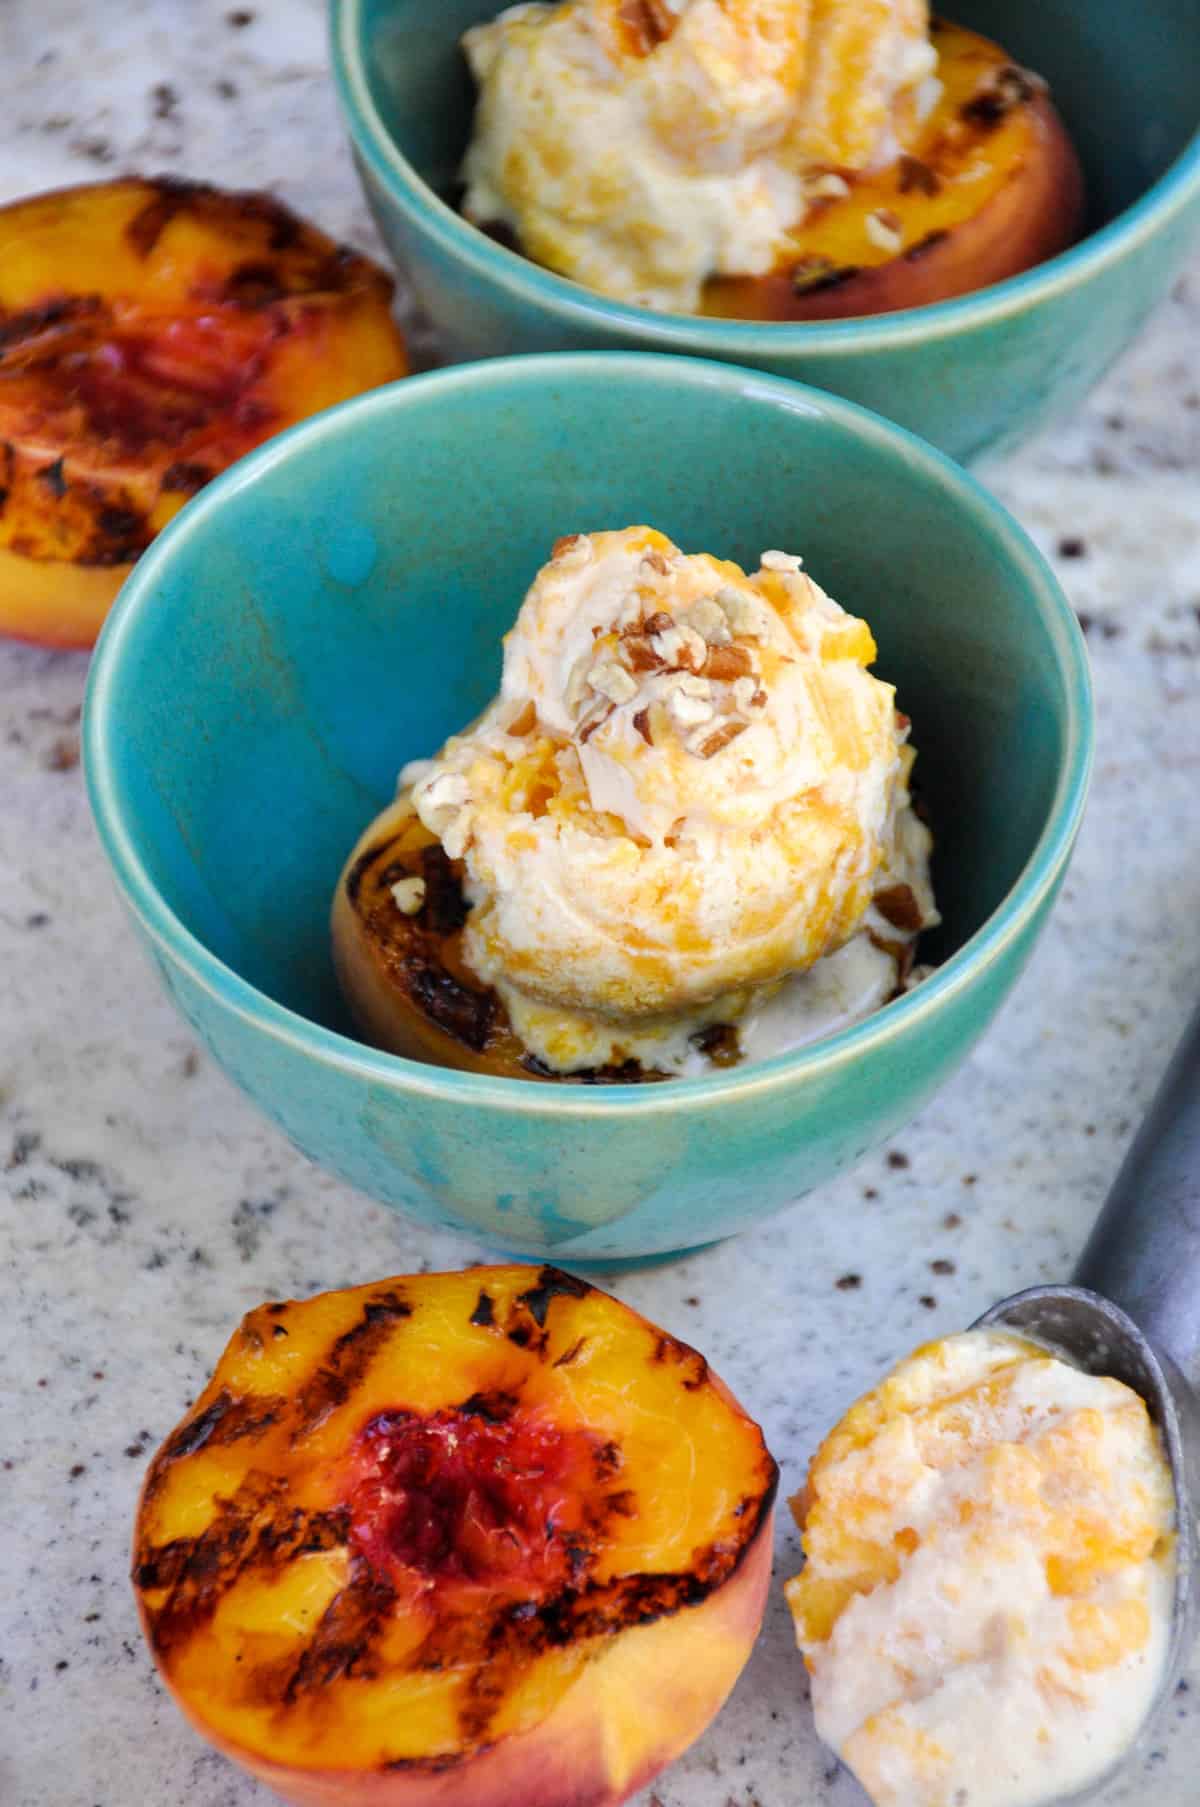 Canned Peach Ice Cream atop Fresh Grilled Peaches